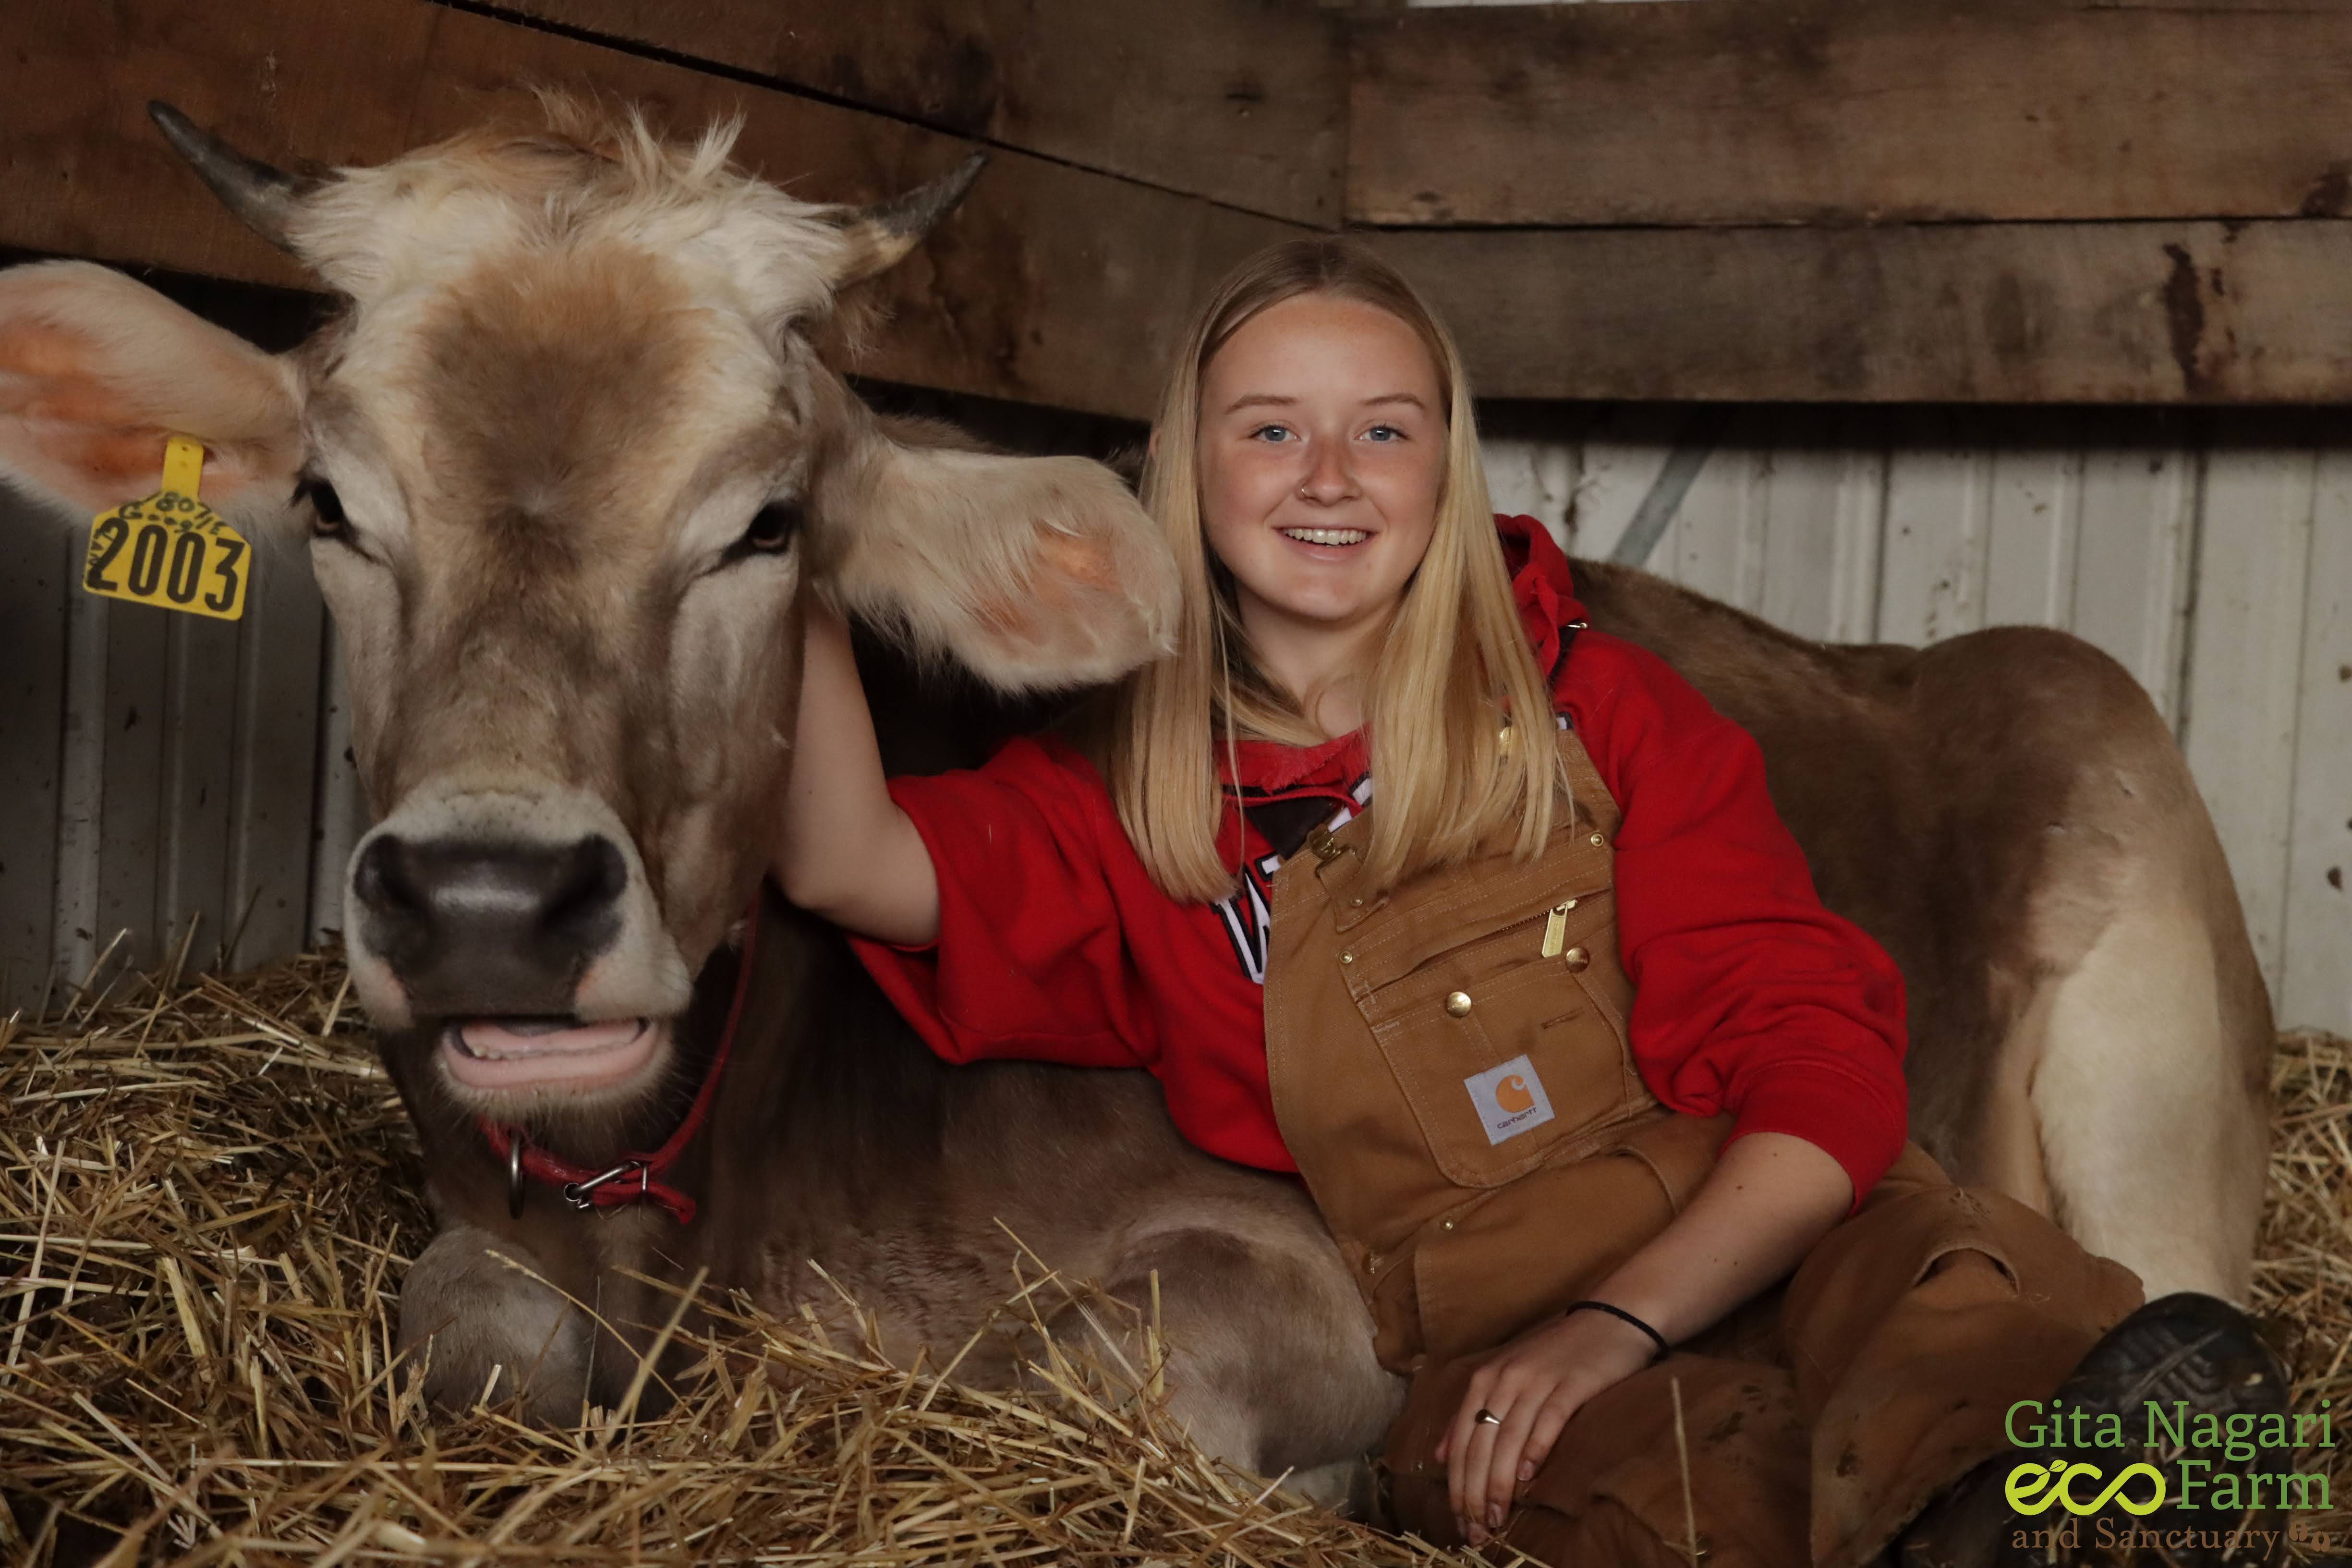 Students get hands on experience working with land and cows